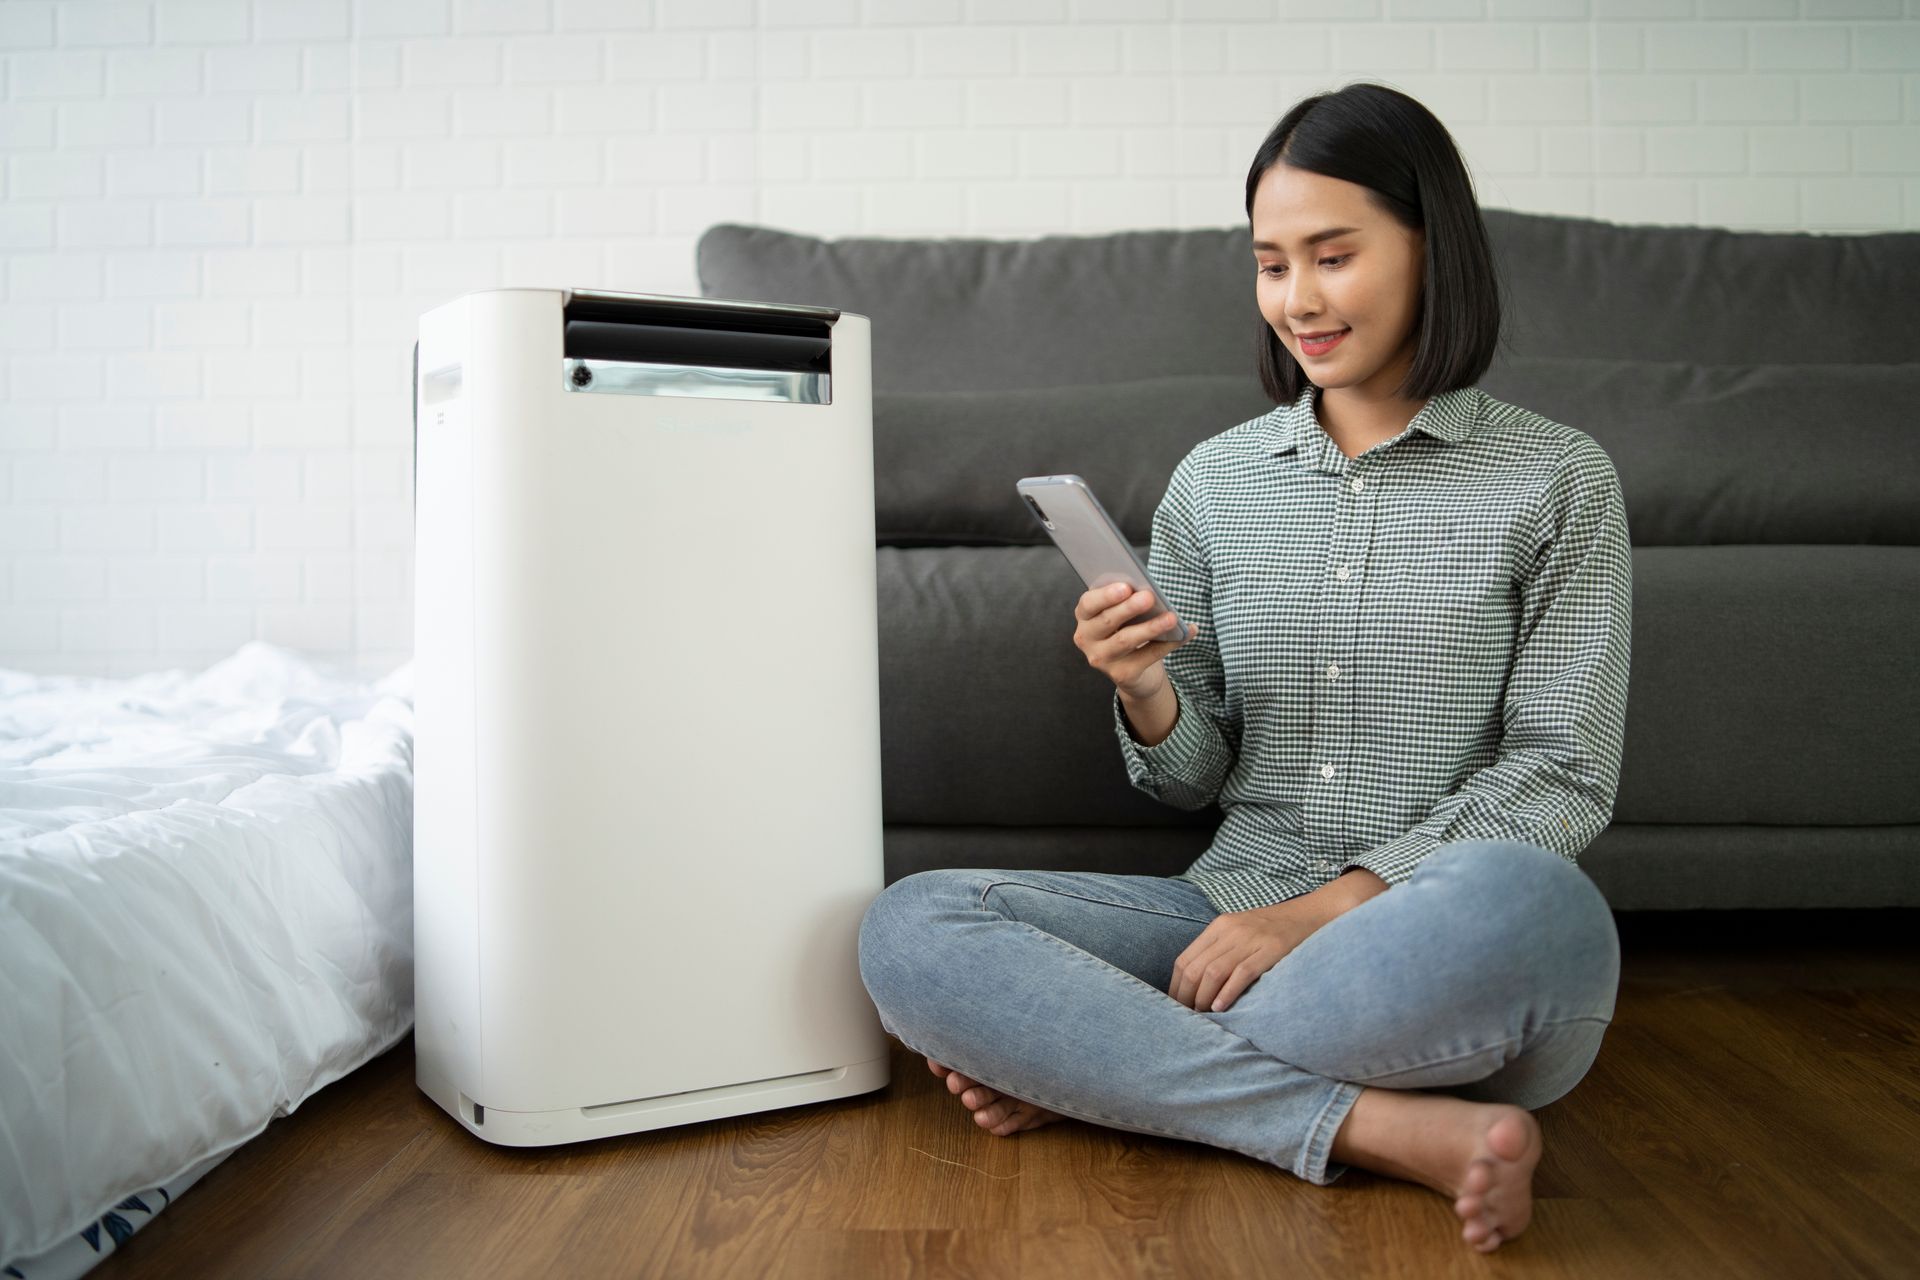 a woman is sitting on the floor using a tablet next to an air purifier .